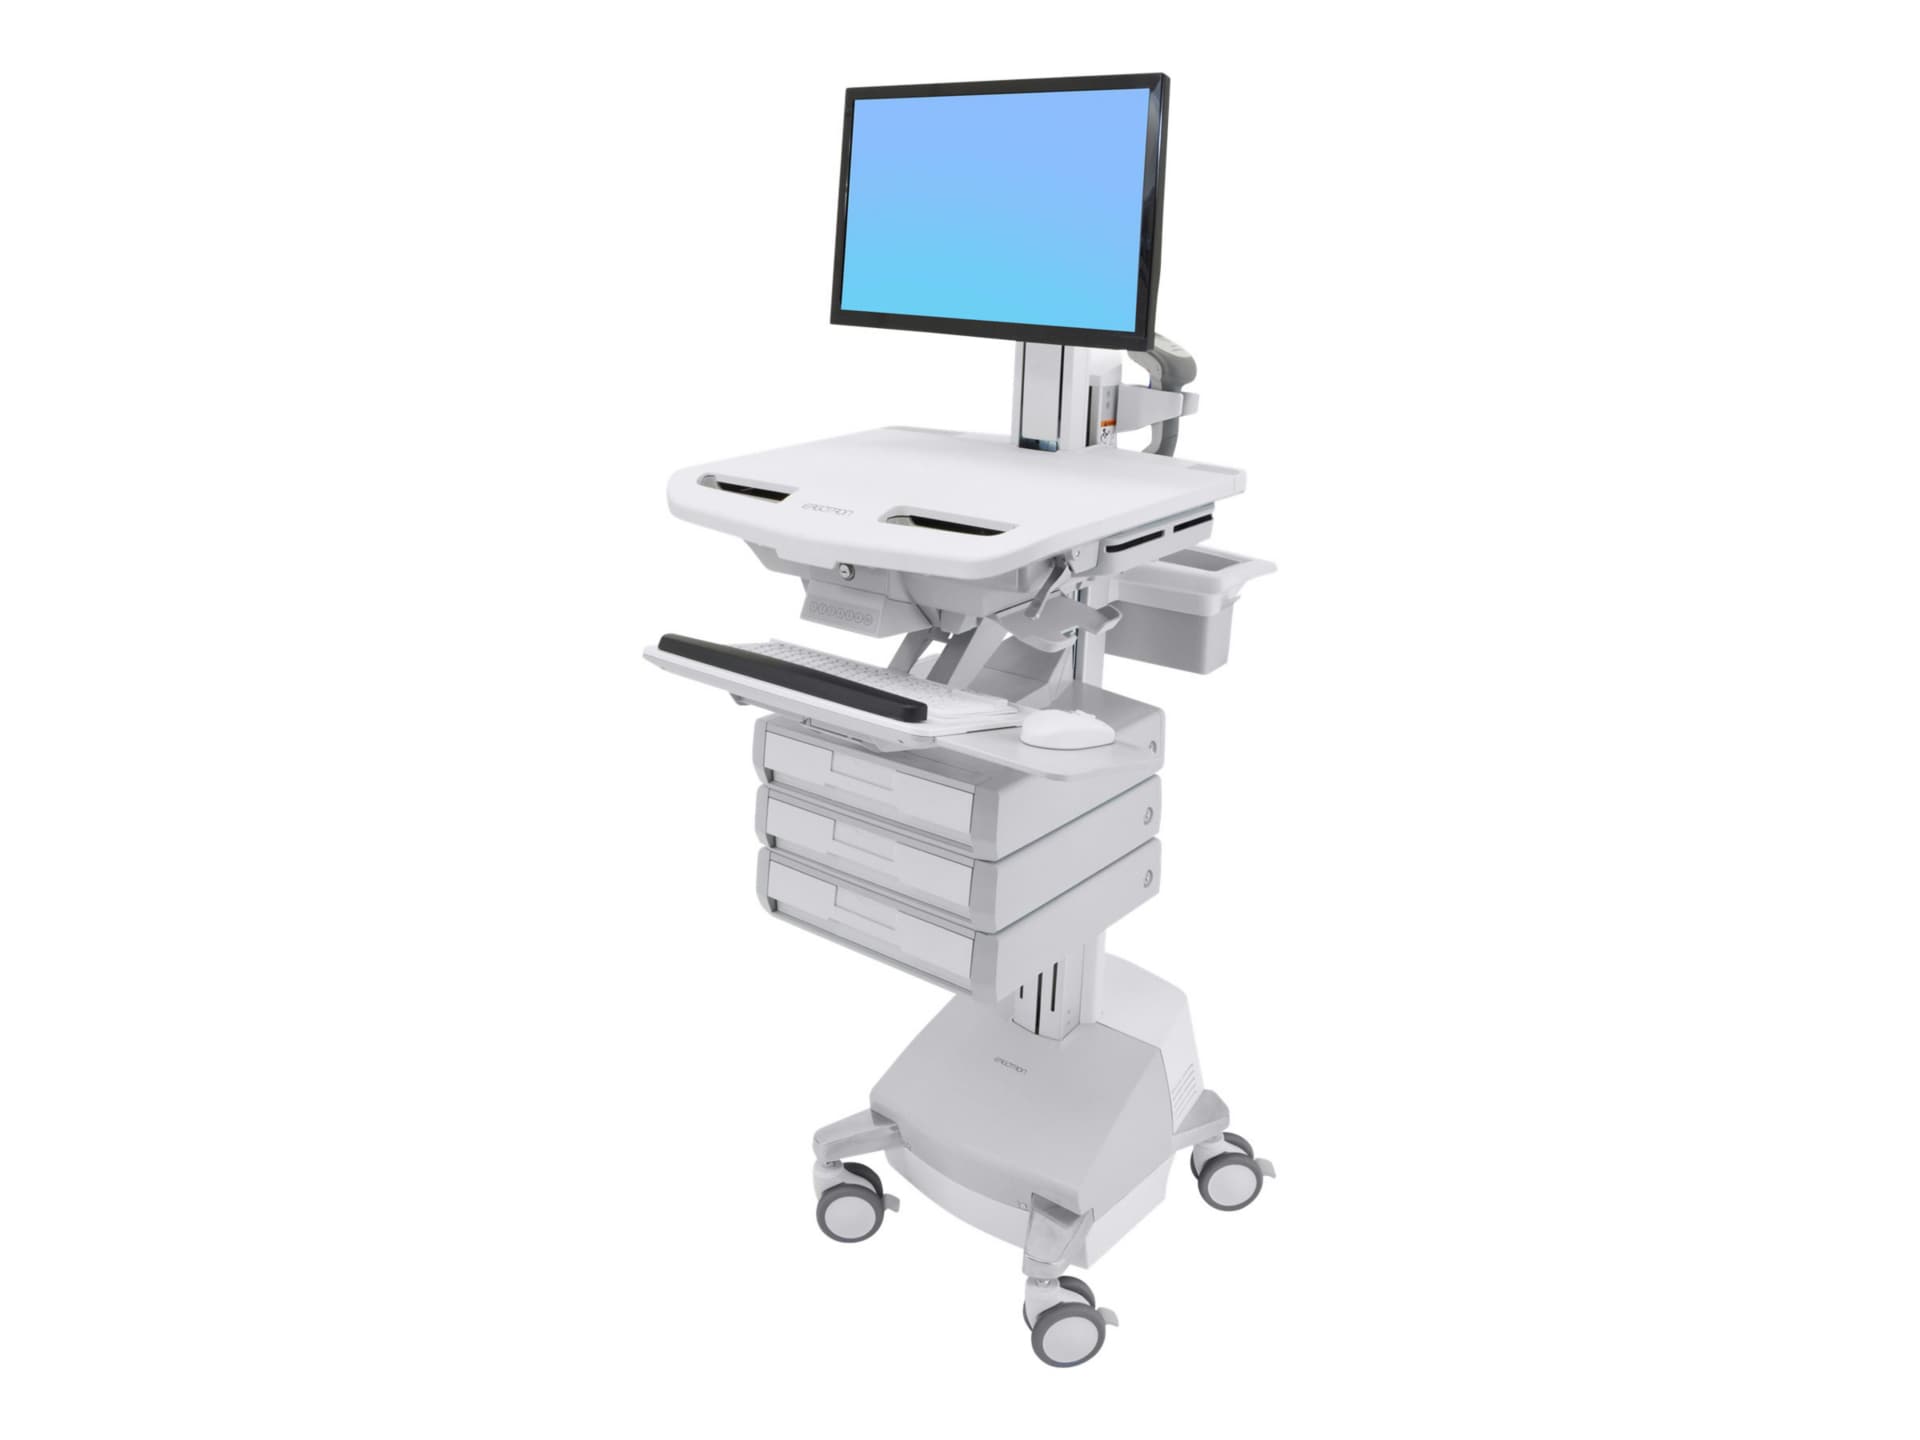 Ergotron StyleView cart - open architecture - for LCD display / keyboard / mouse / barcode scanner / CPU - TAA Compliant